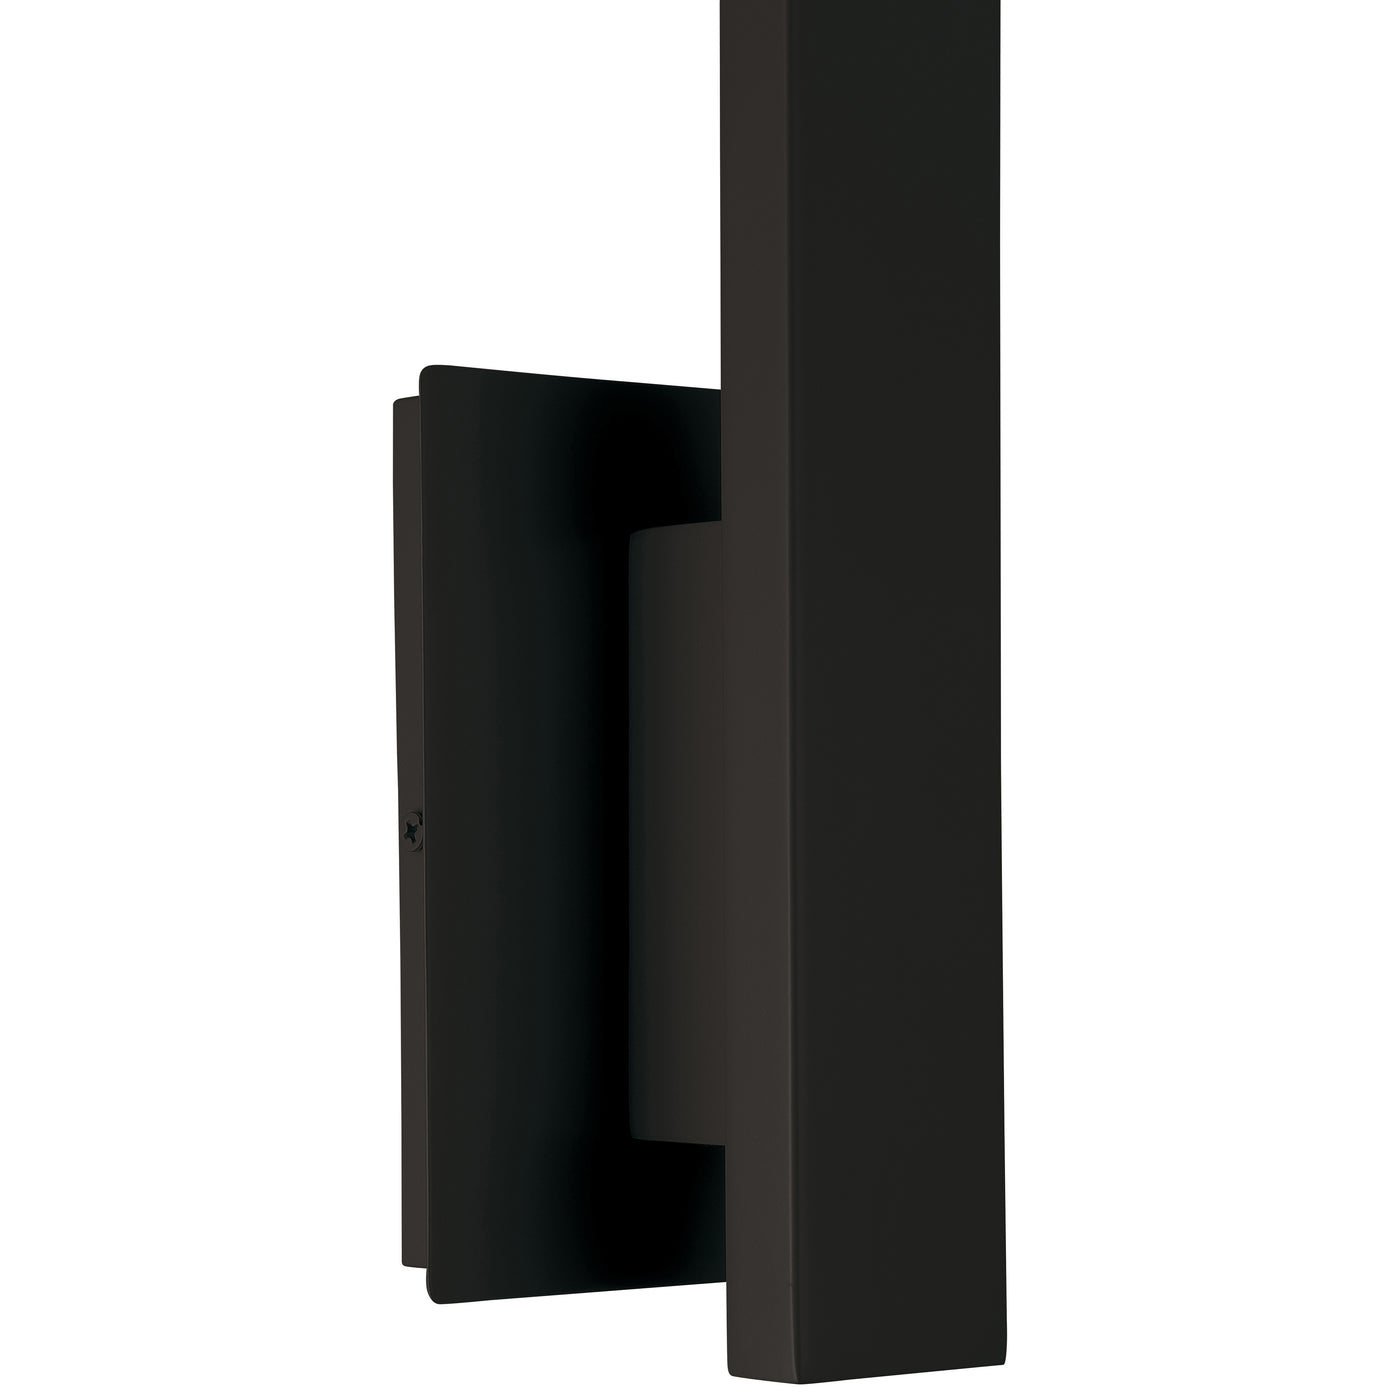 LED Wall Sconce, 1000 Lumens, 10W, 3000K, 120V, Matte Black Finish, Haus Collection